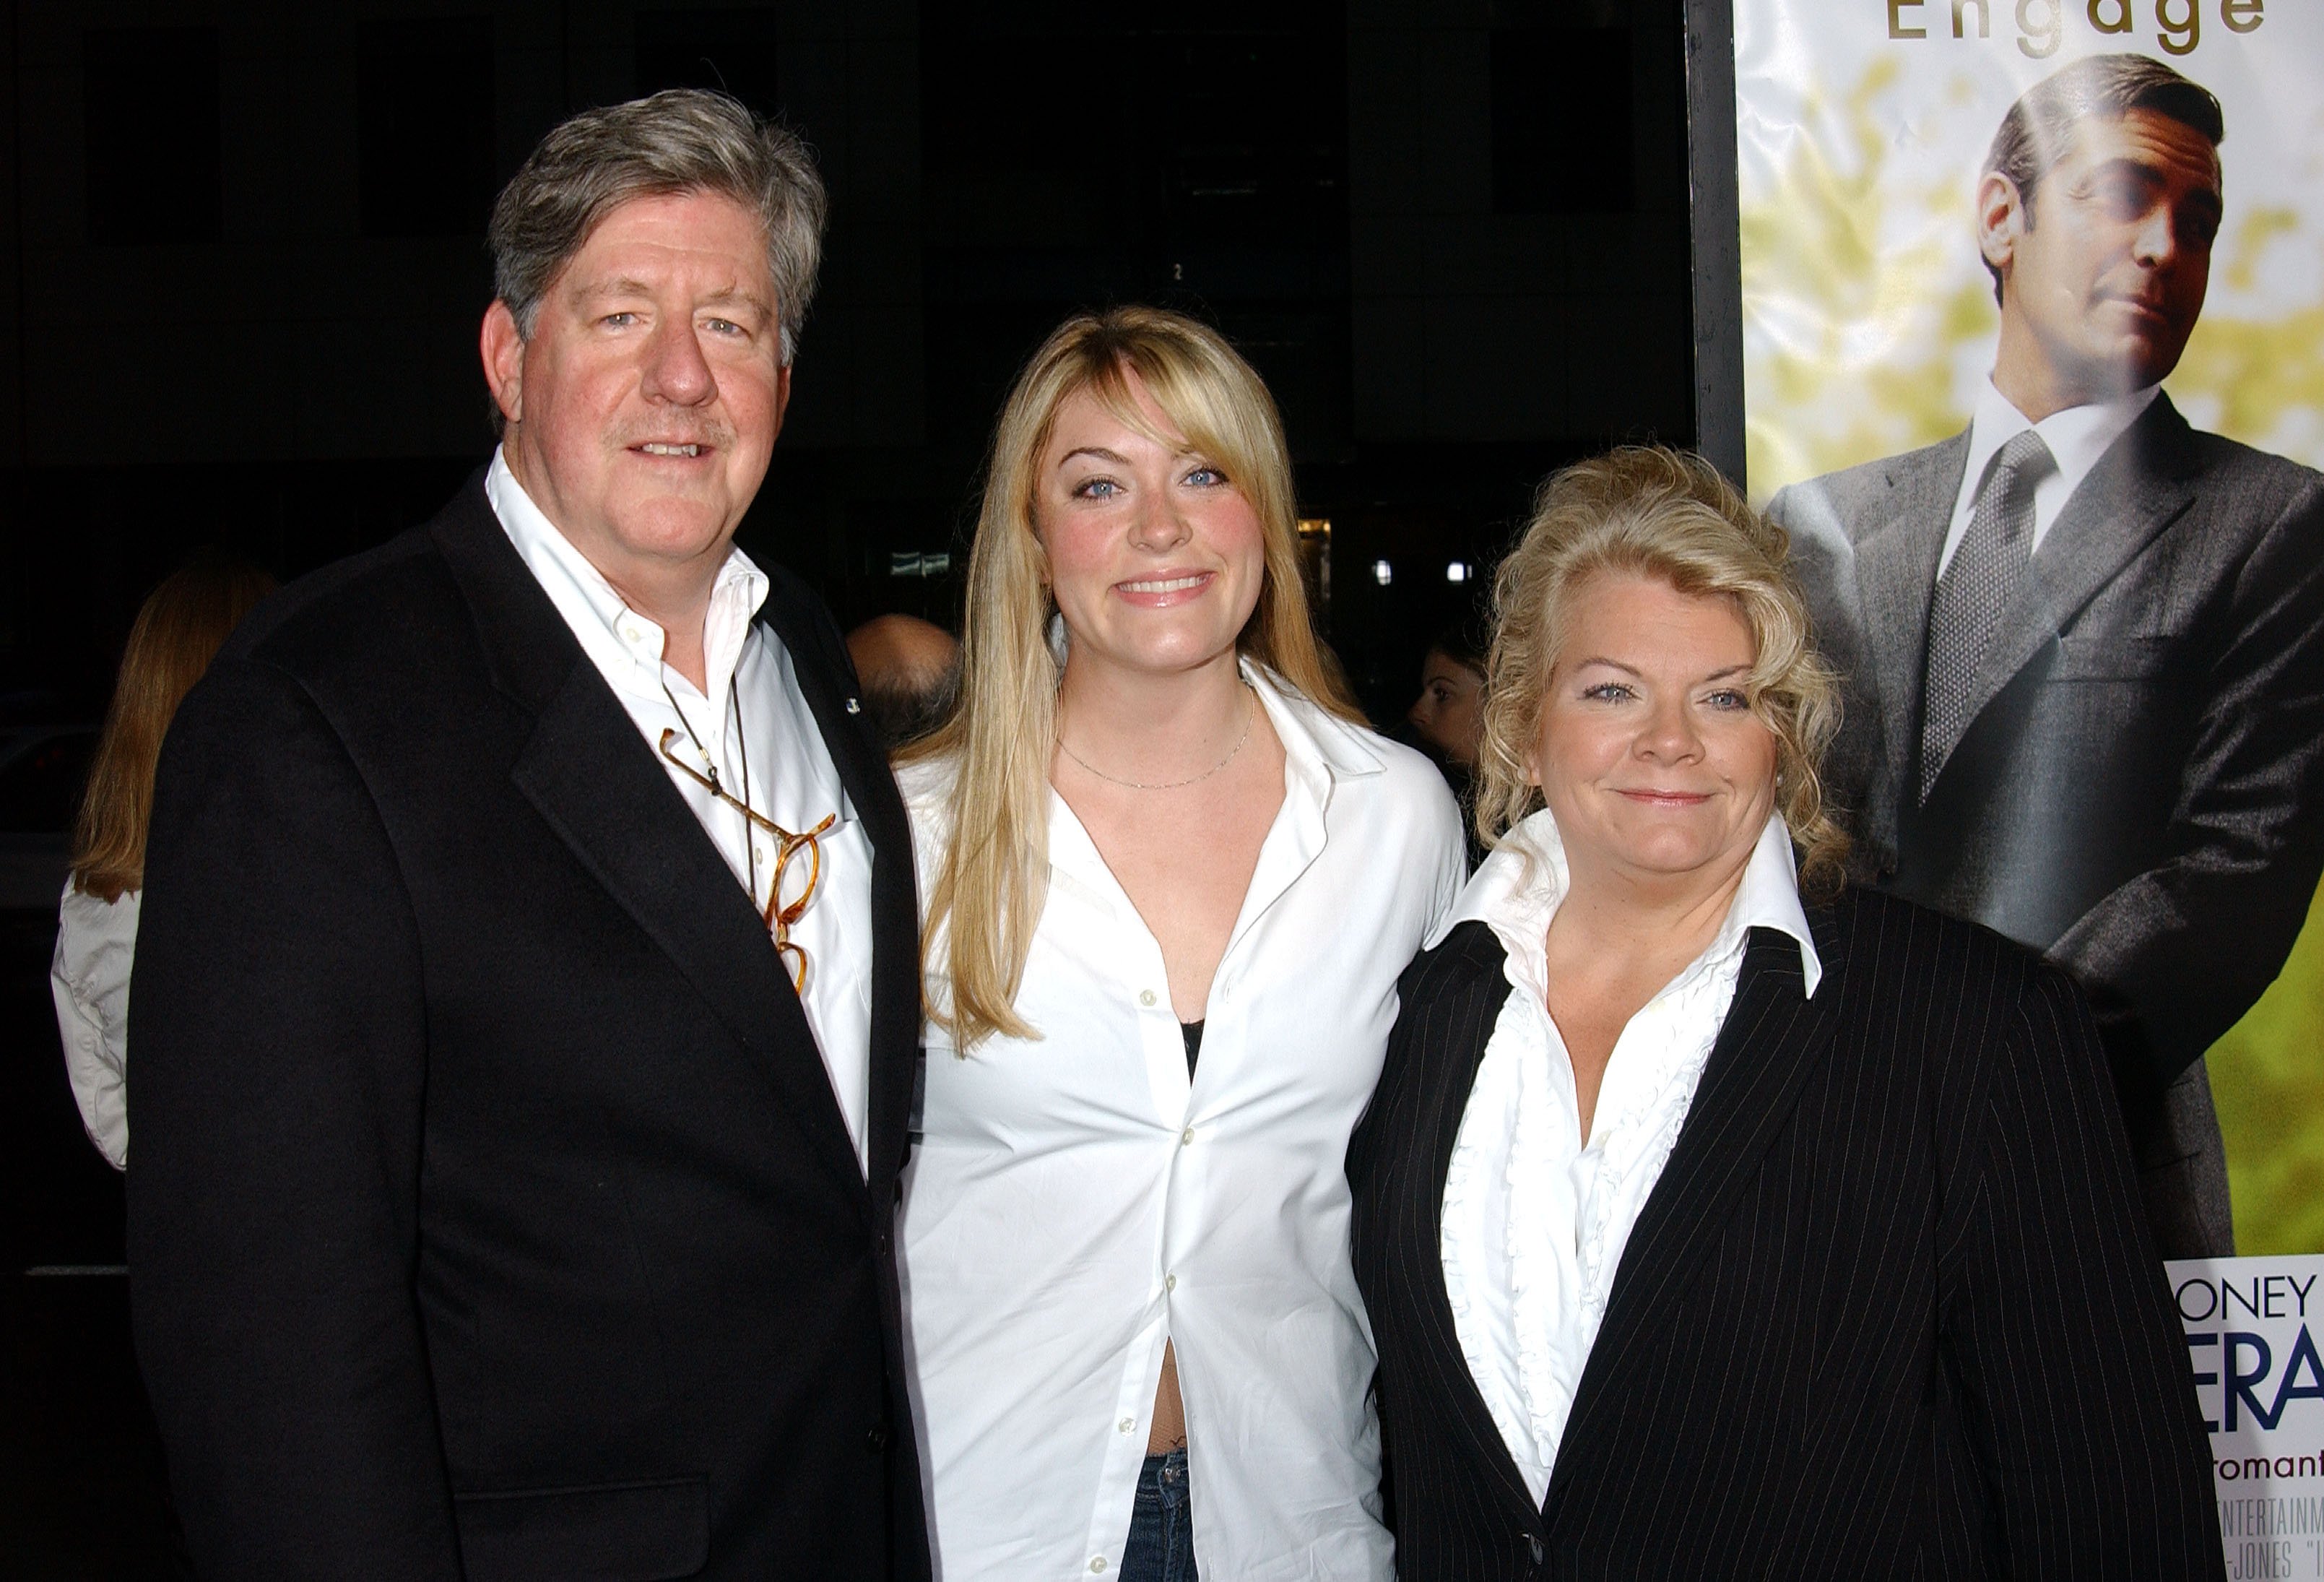 Edward Herrmann with daughter Ryen and wife Starr during "Intolerable Cruelty" Premiere - Arrivals at Academy Theatre in Beverly Hills, California | Photo: Getty Images